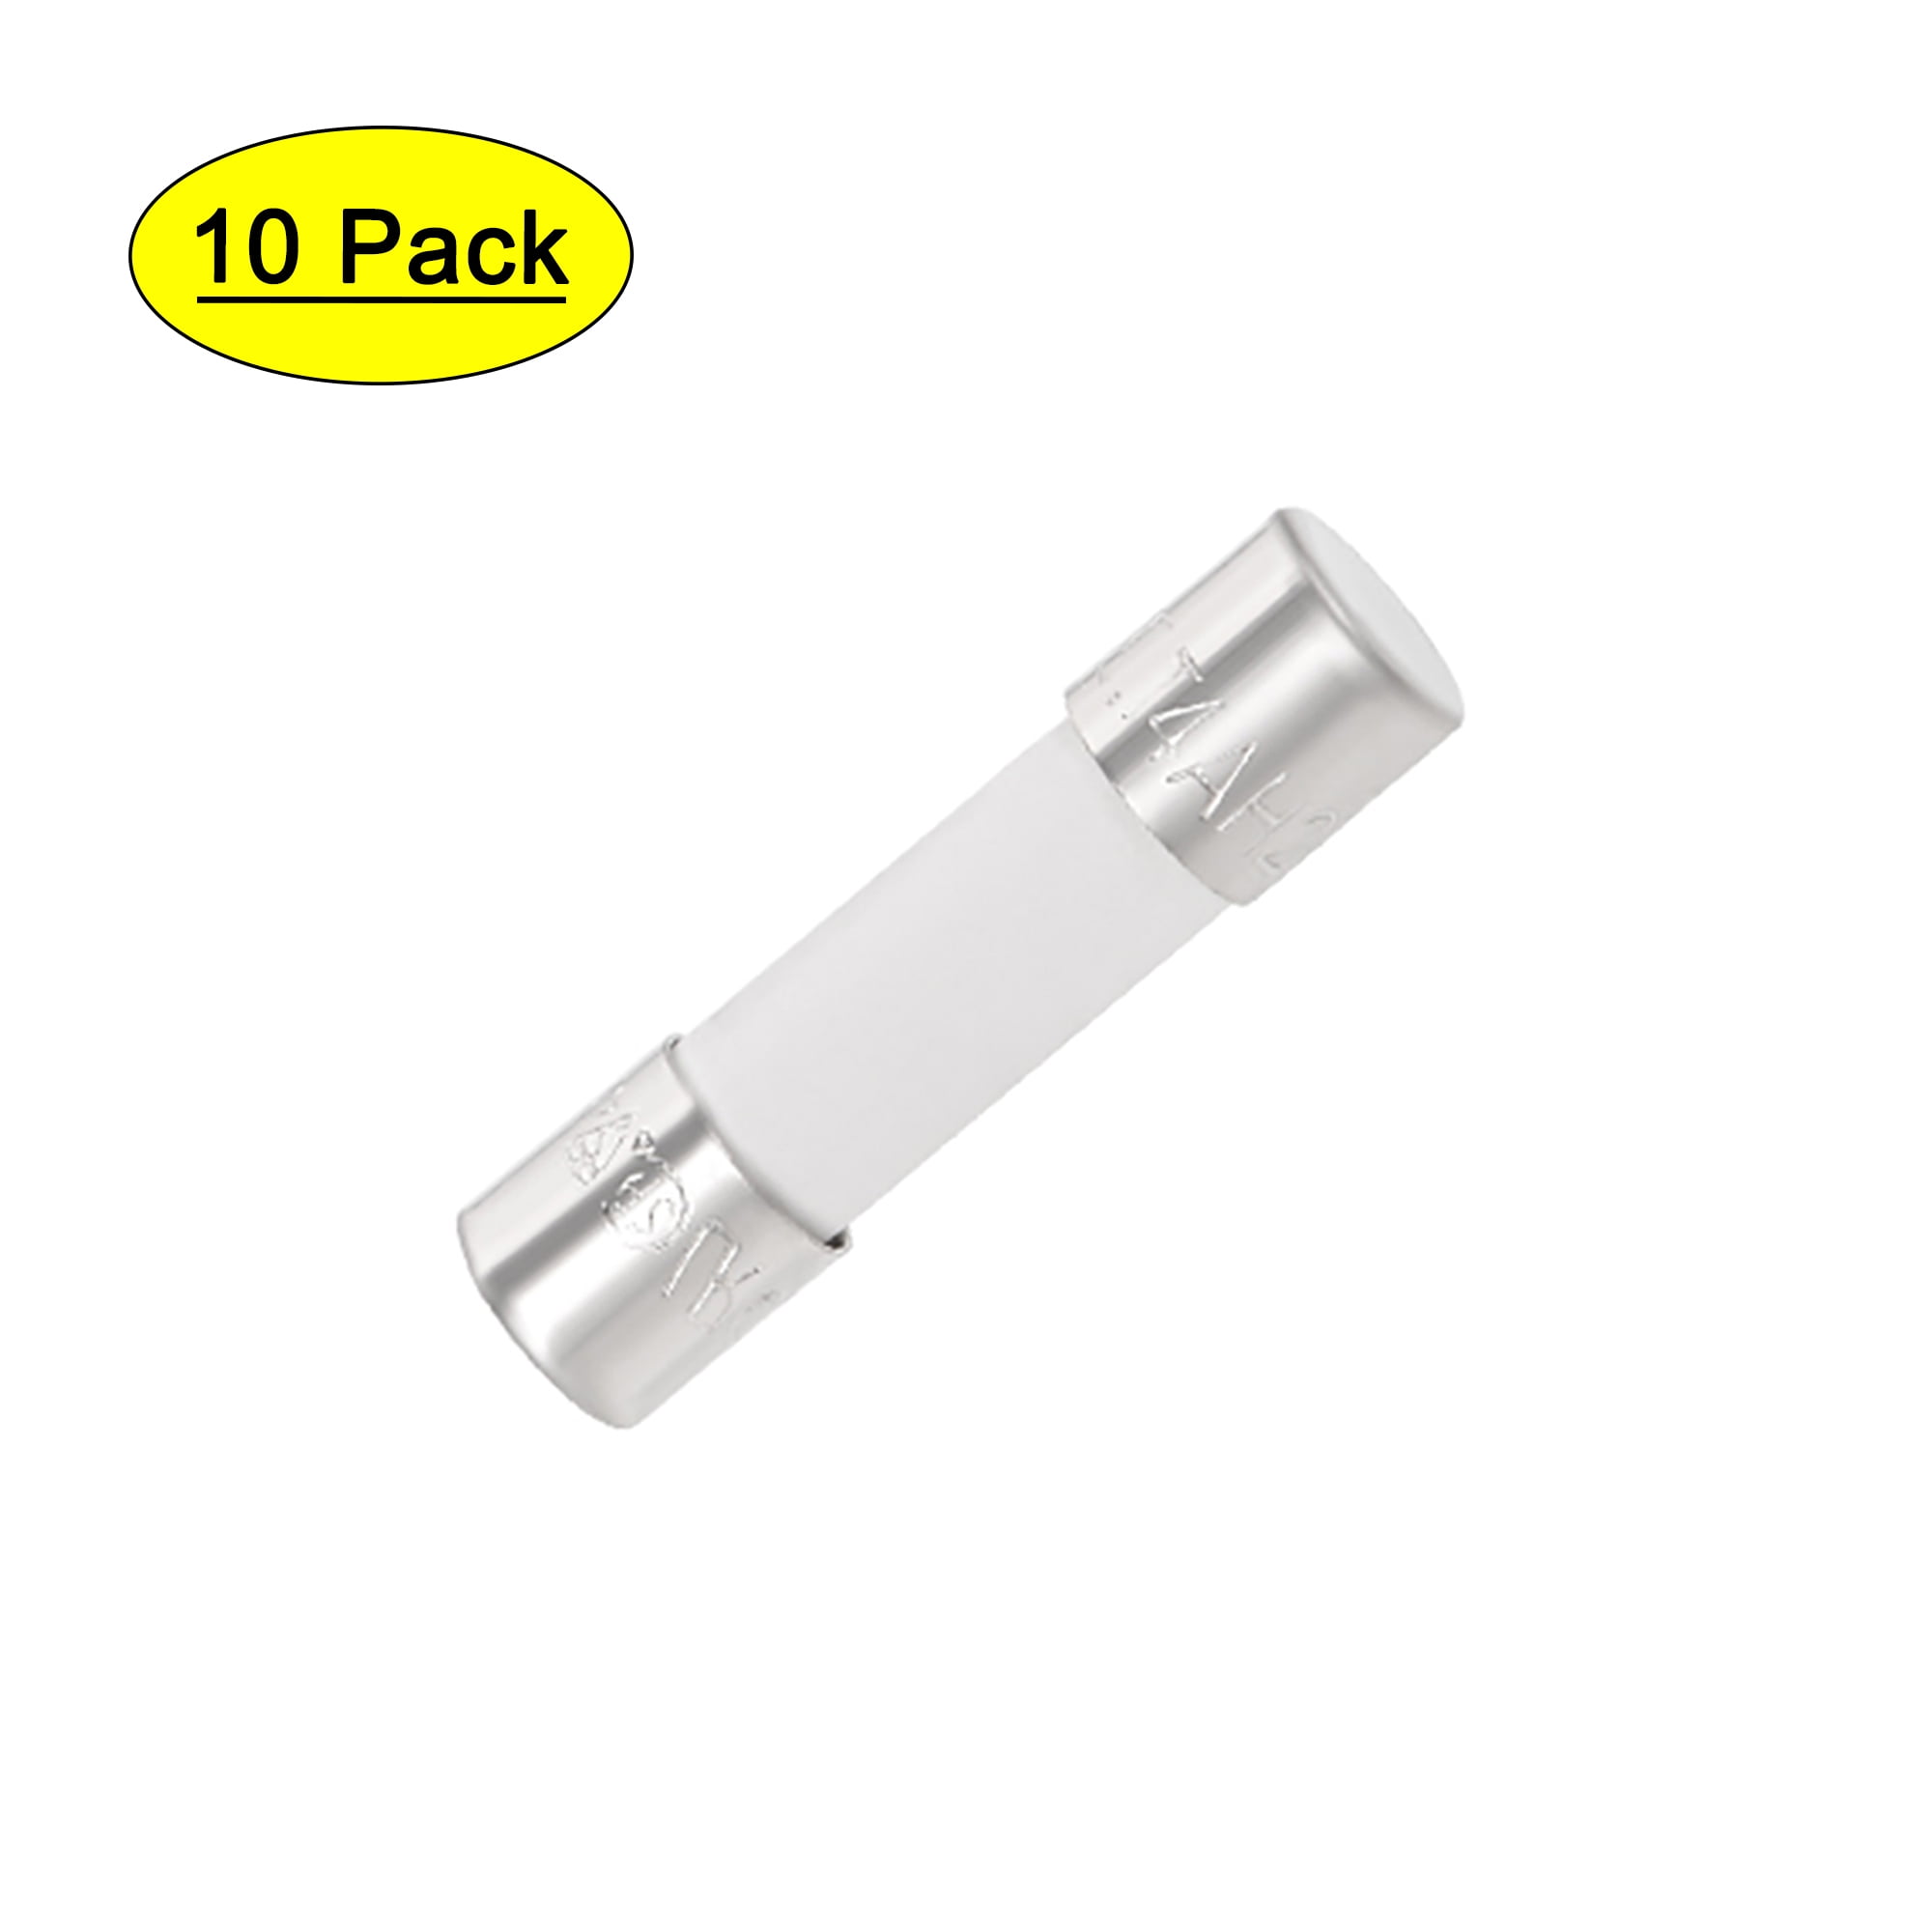 4A 250VAC Glass Fuse 5x20mm Slow Blow Pack of 10 